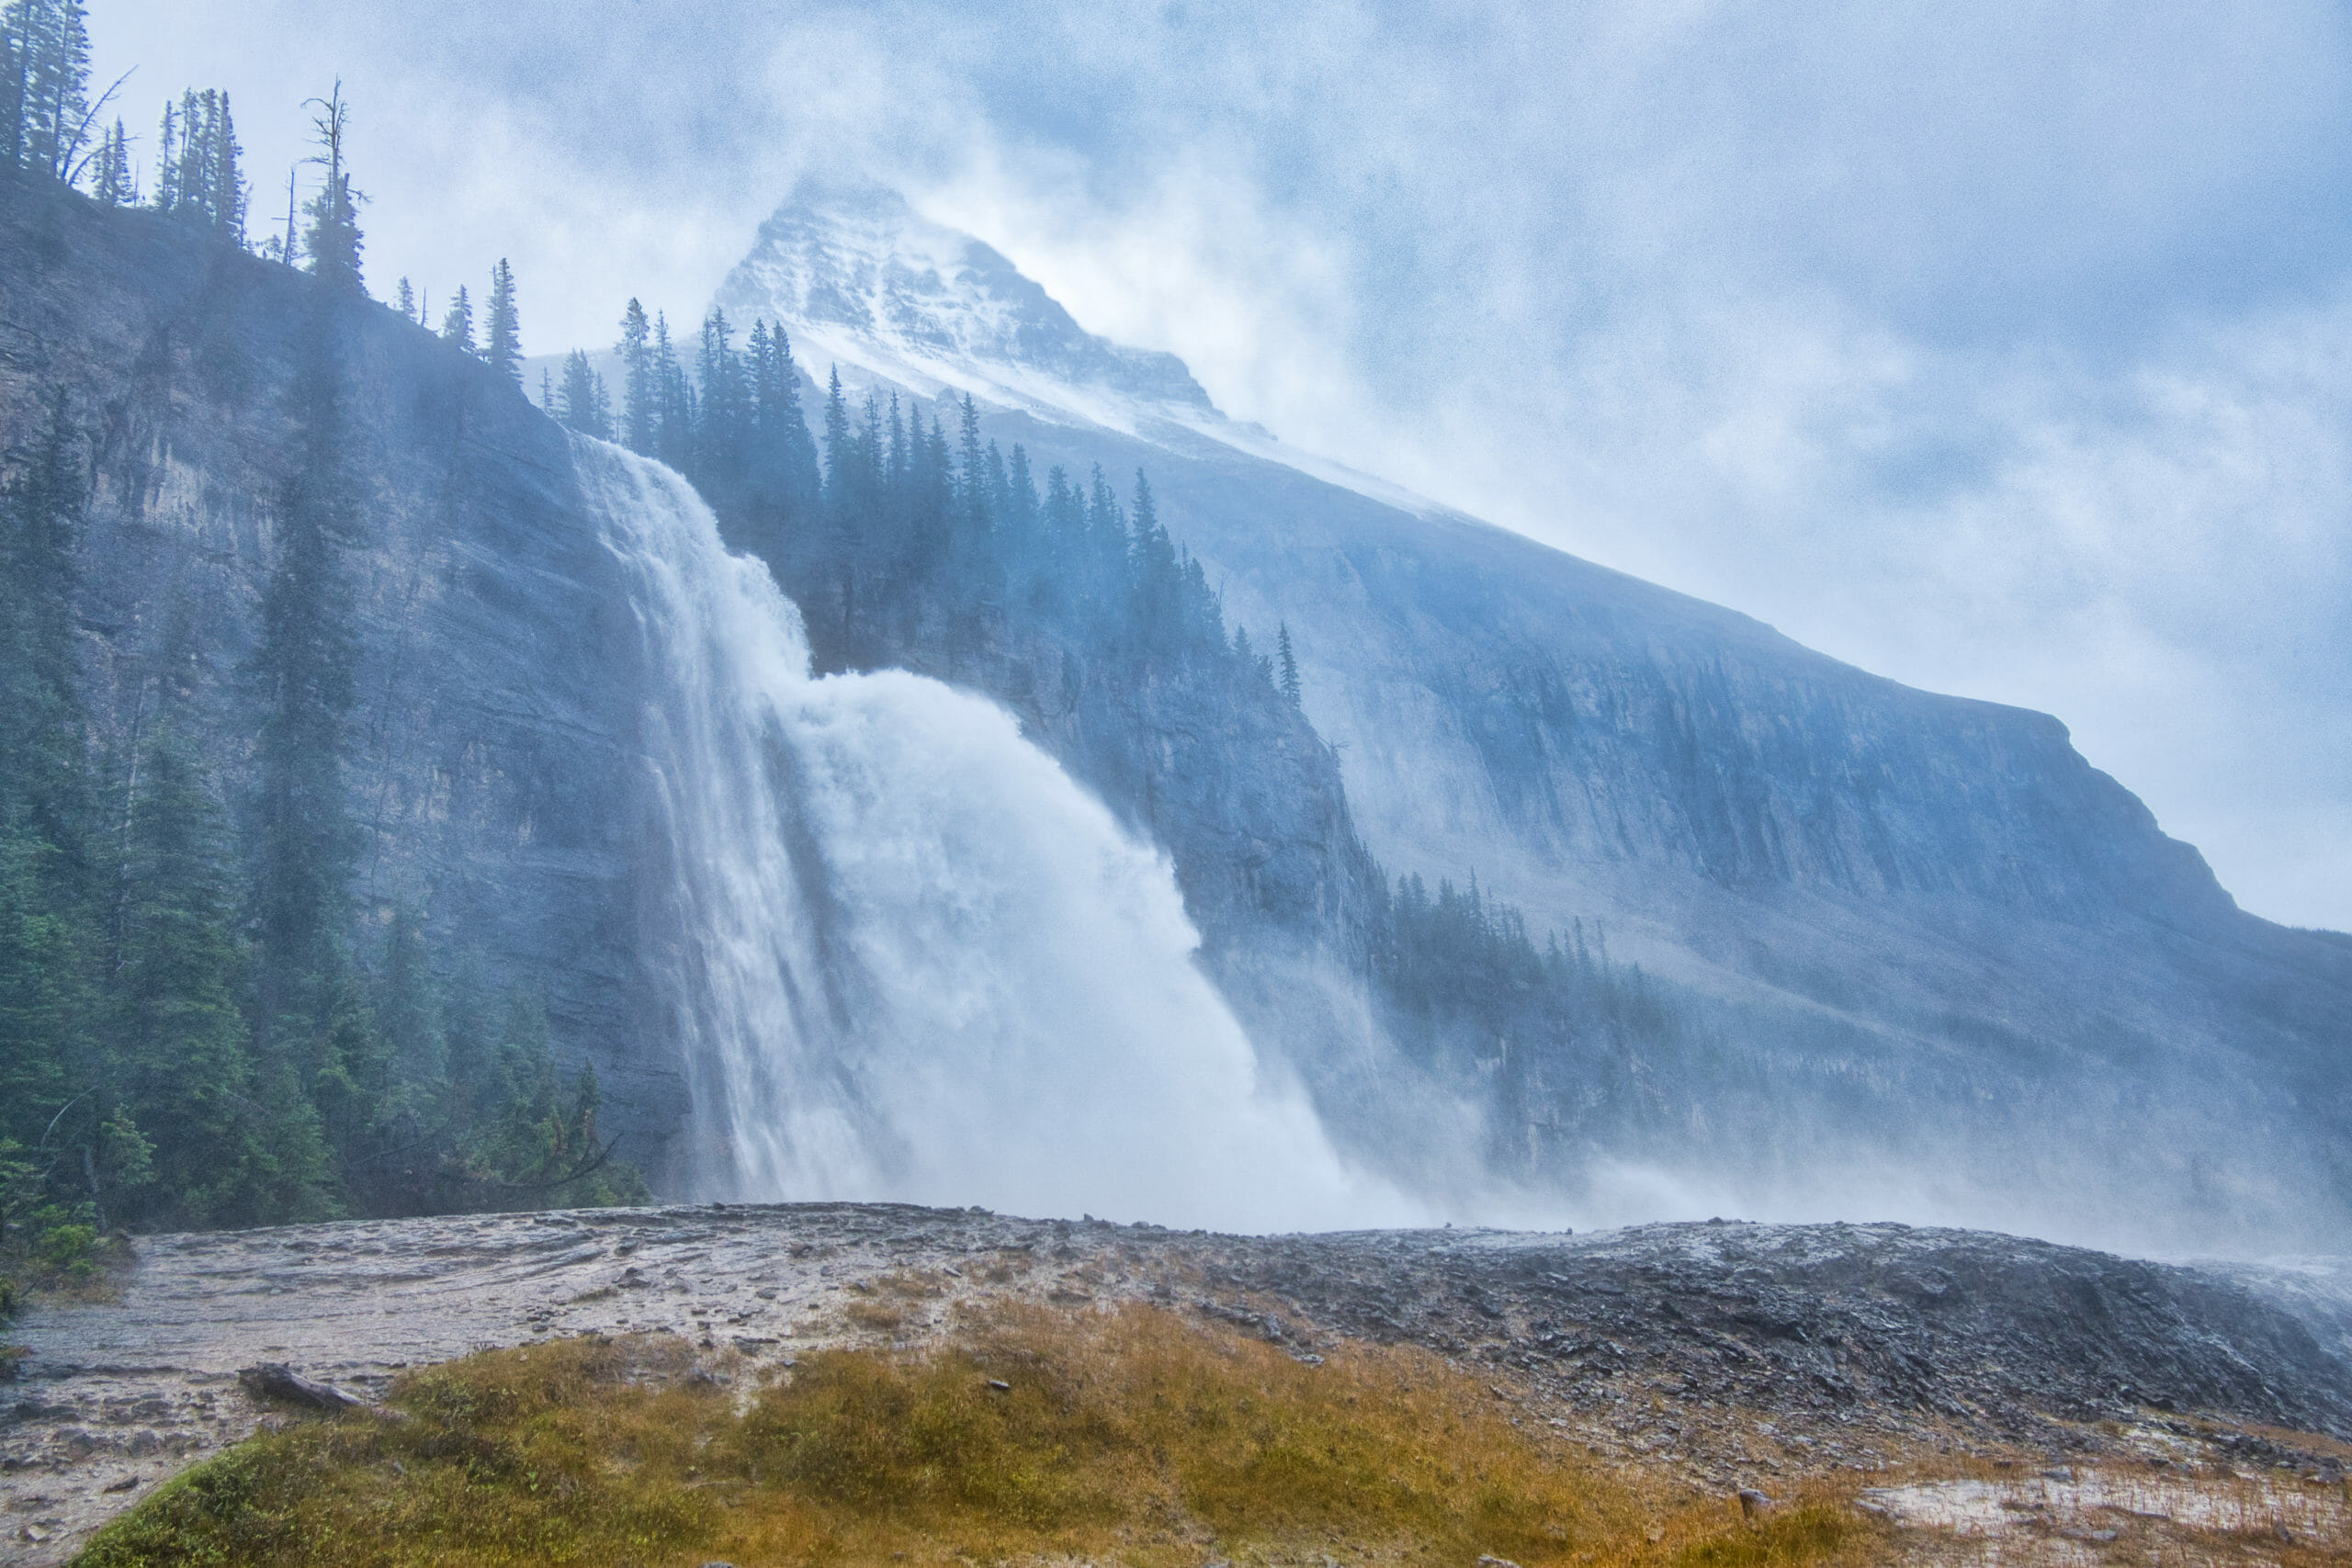 Emperor Falls in Mount Robson Provincial Park with Mount Robson in background on rainy day with heavy winds